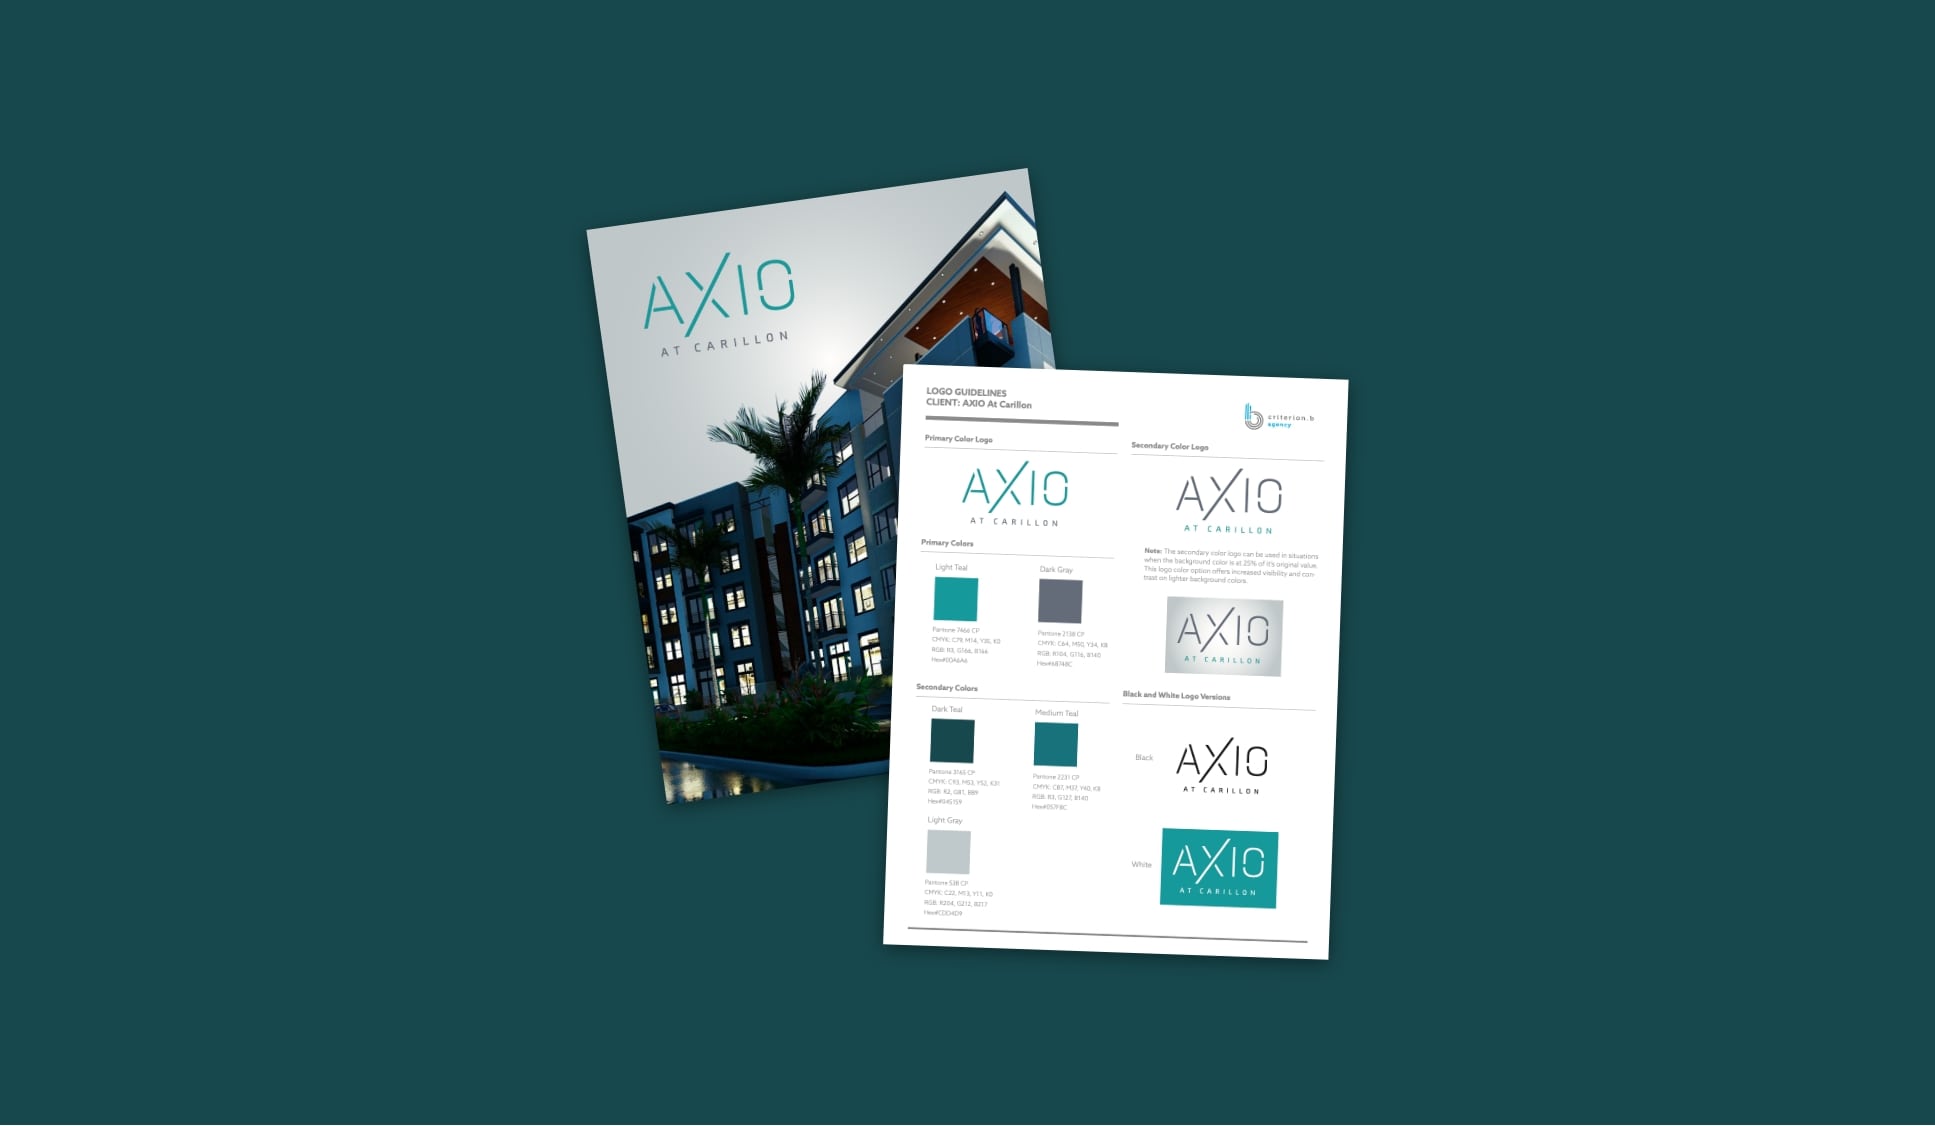 An example of multifamily branding and apartment brand positioning we did as part of our solutions at Criterion.B